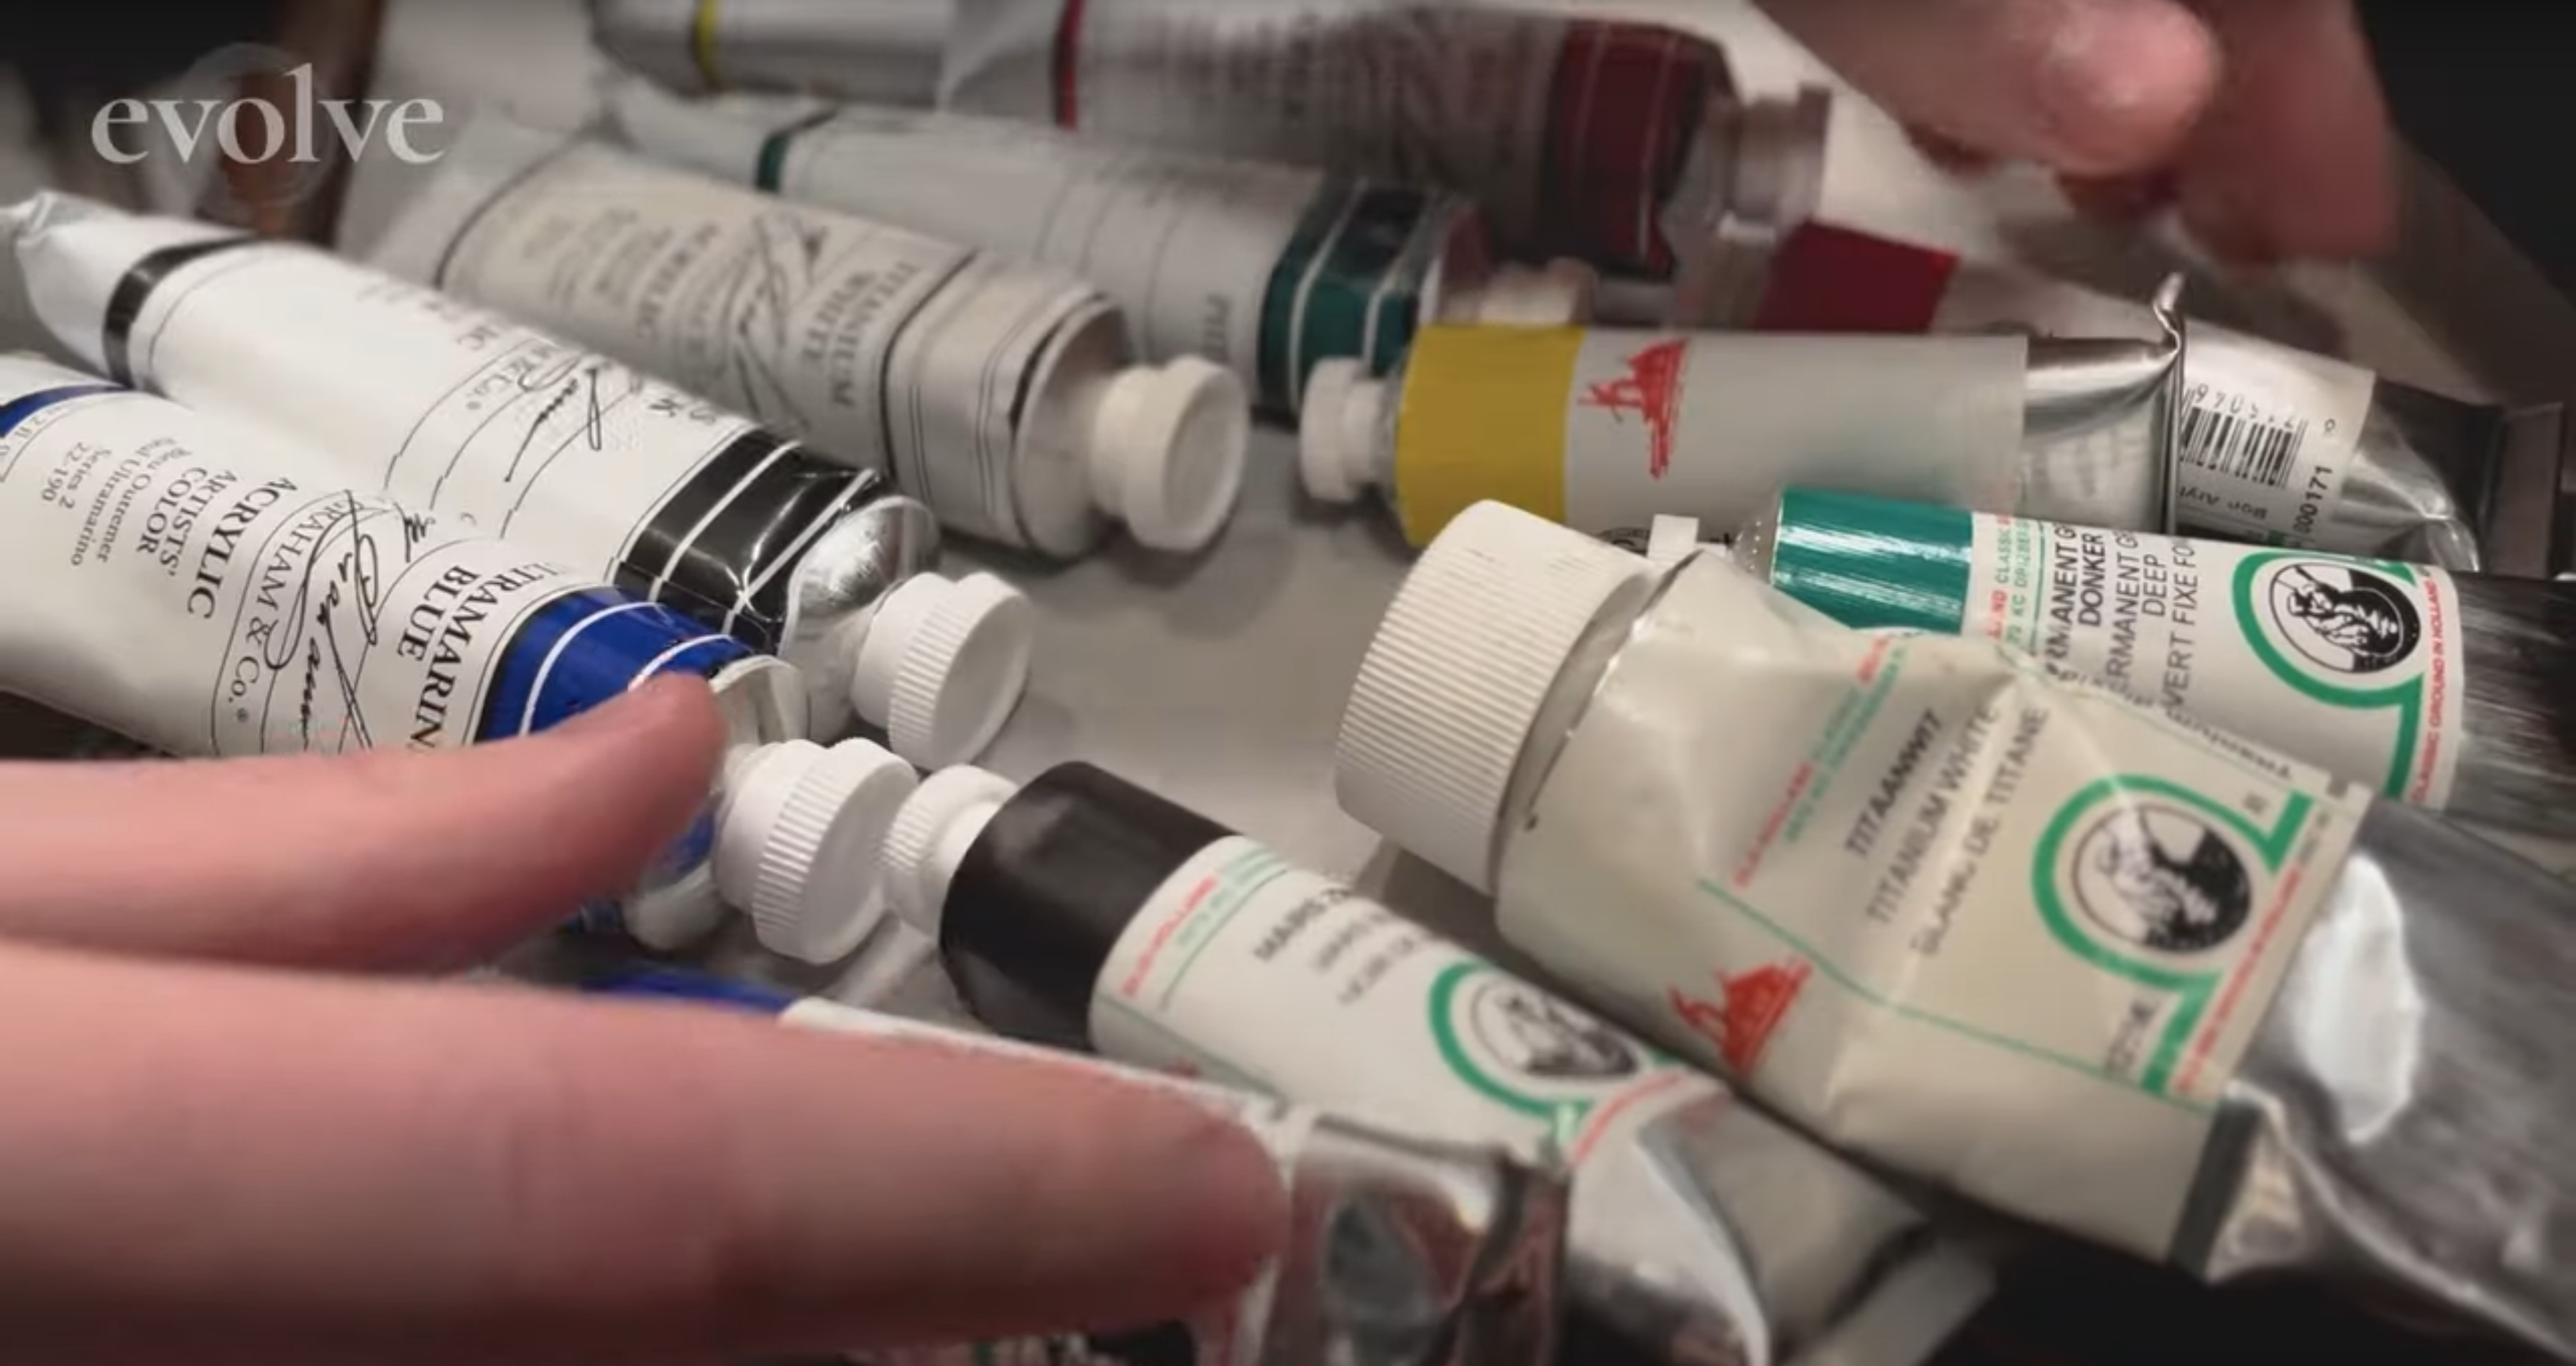 Daniel Folta of Evolve Artist will perform a gradient test to compare acrylic vs oil paints.